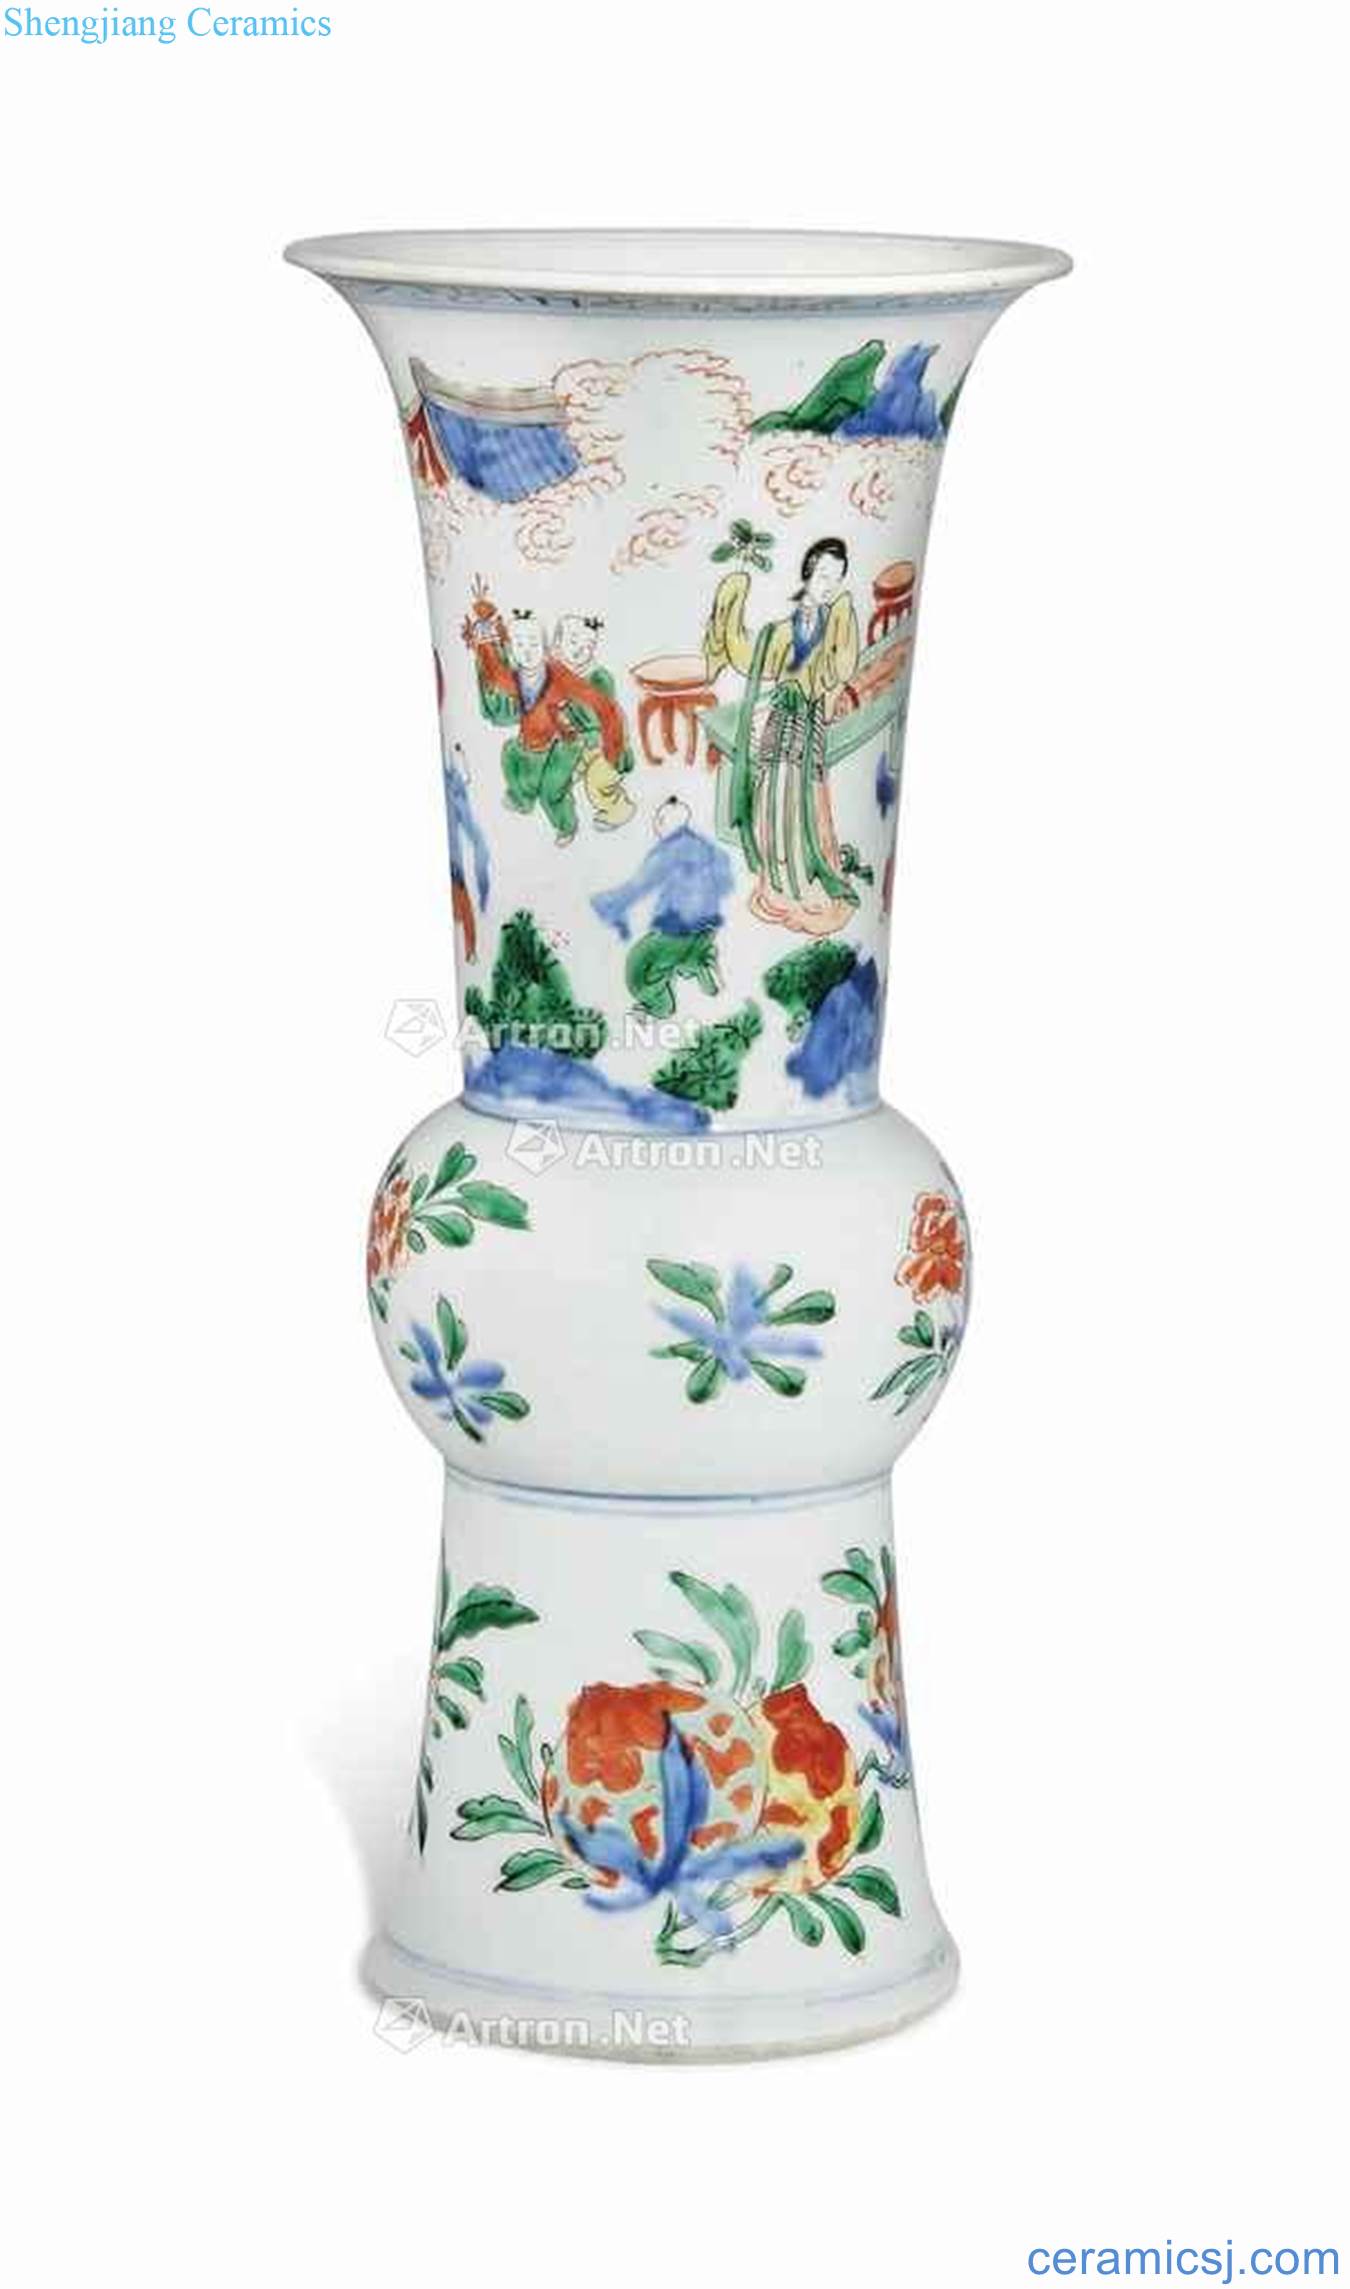 Qing shunzhi Colorful character lines vase with flowers